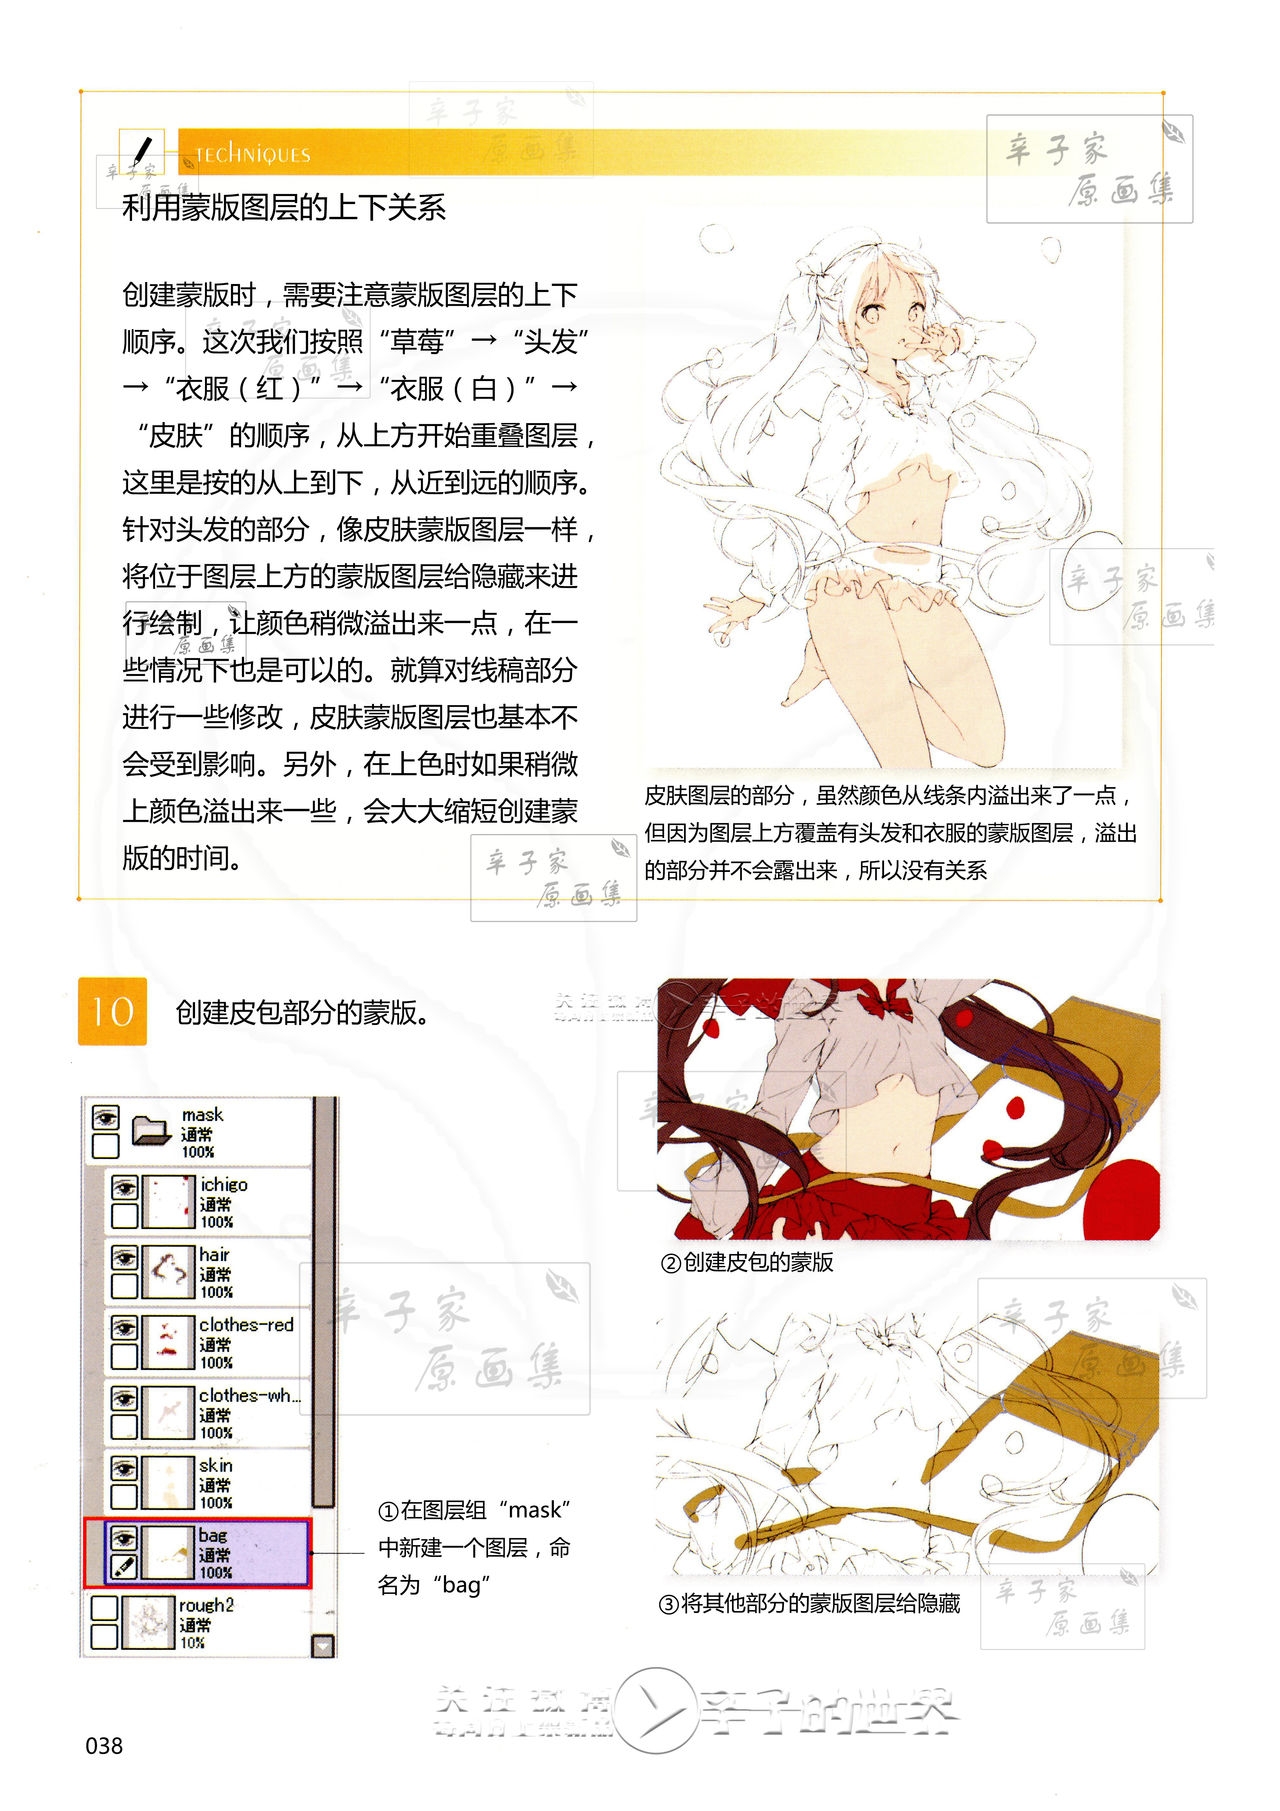 [Anmi] Lets Make ★ Character CG illustration techniques vol.9 [Chinese] 36